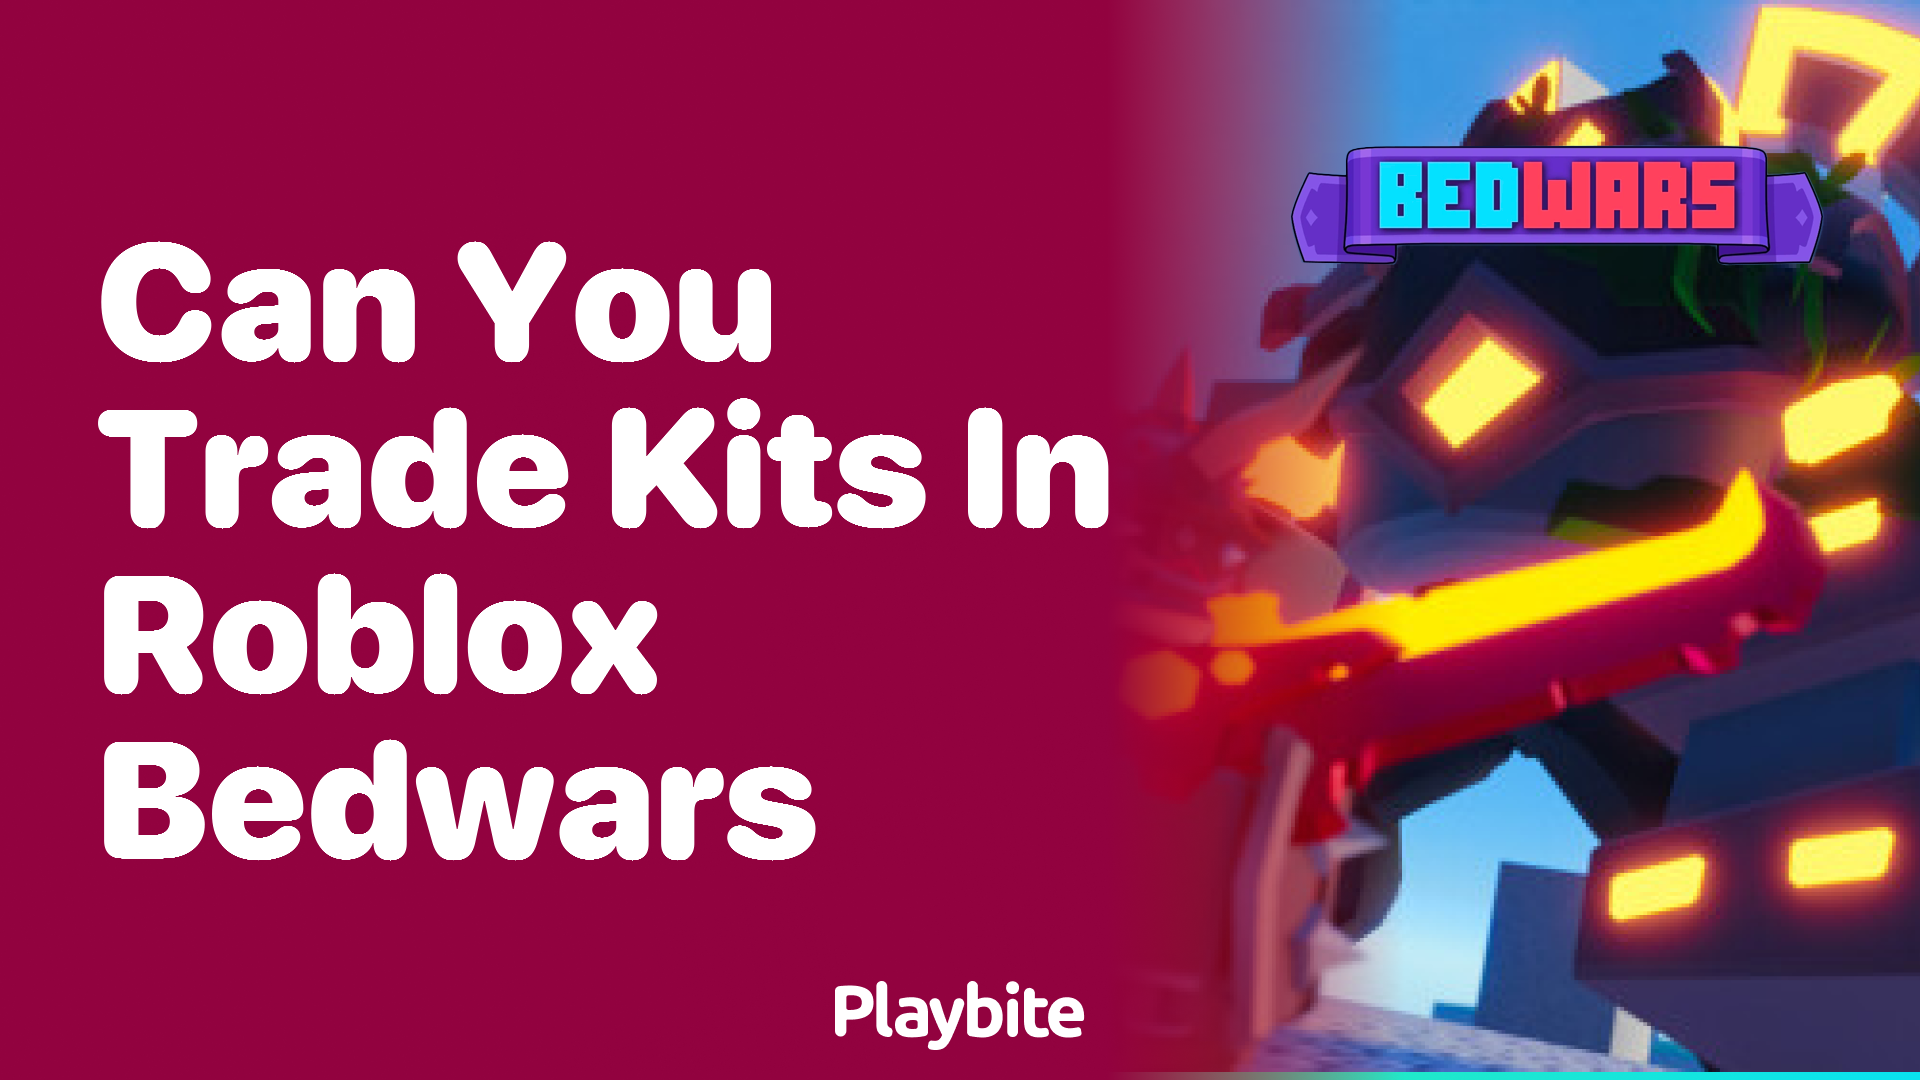 Can You Trade Kits in Roblox Bedwars?